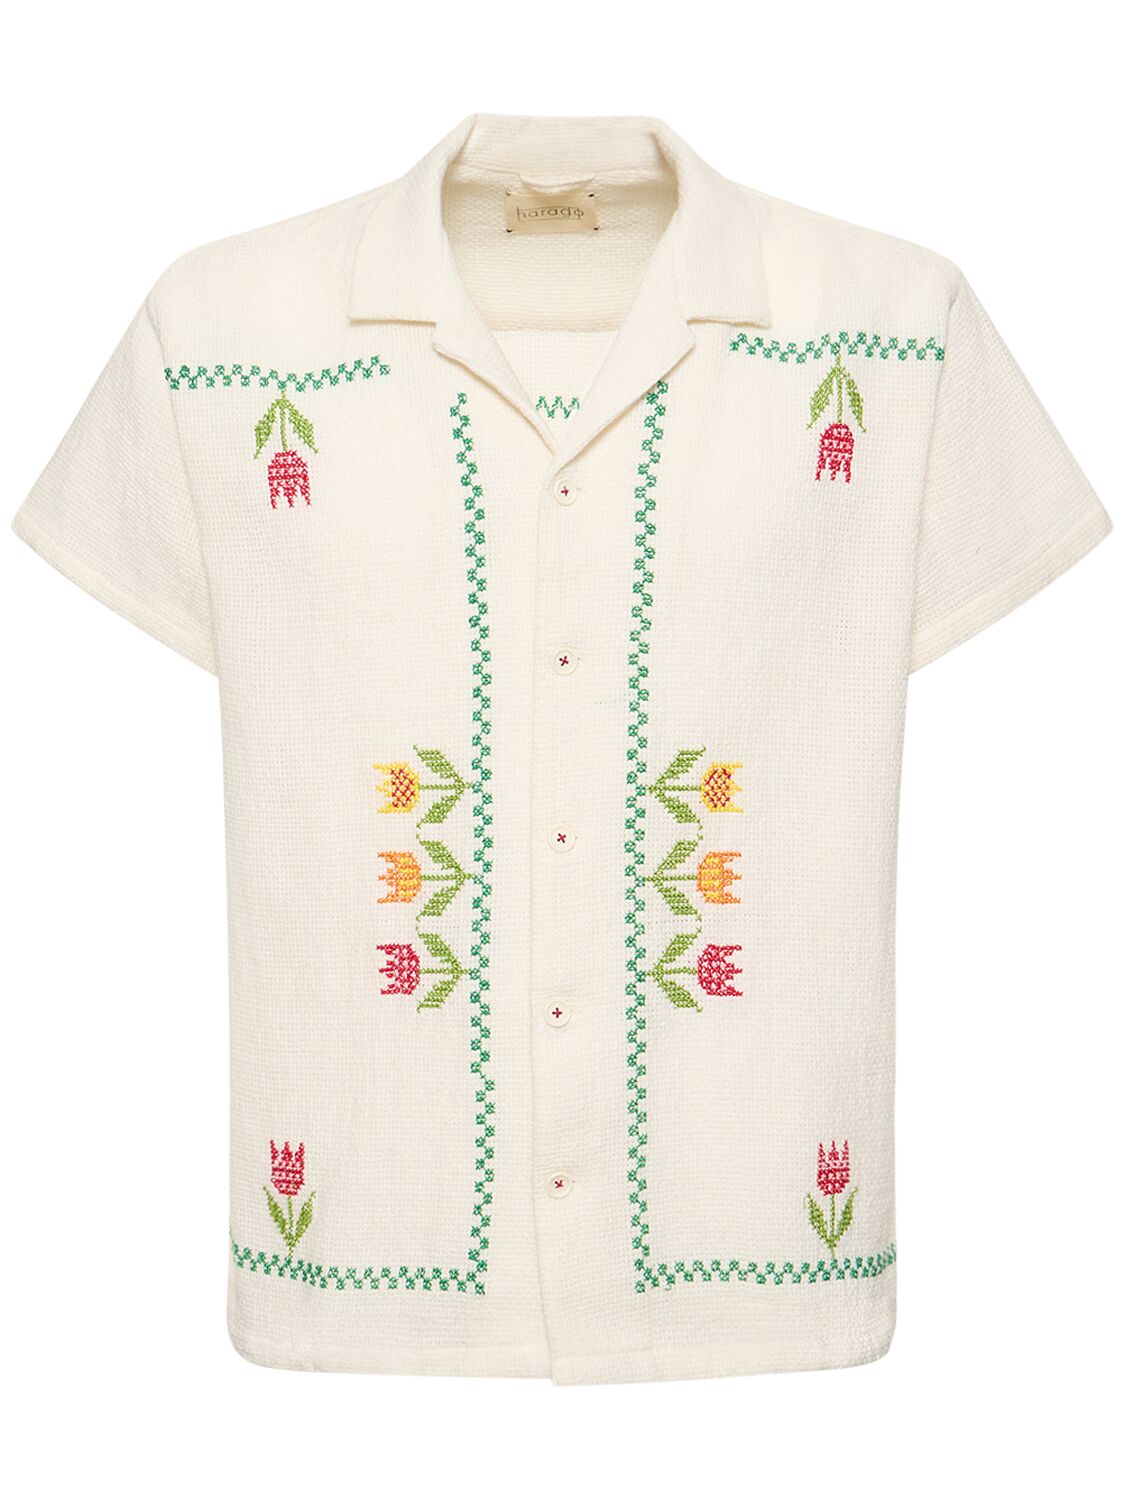 HARAGO TULIP CROSS EMBROIDERED COTTON SHIRT